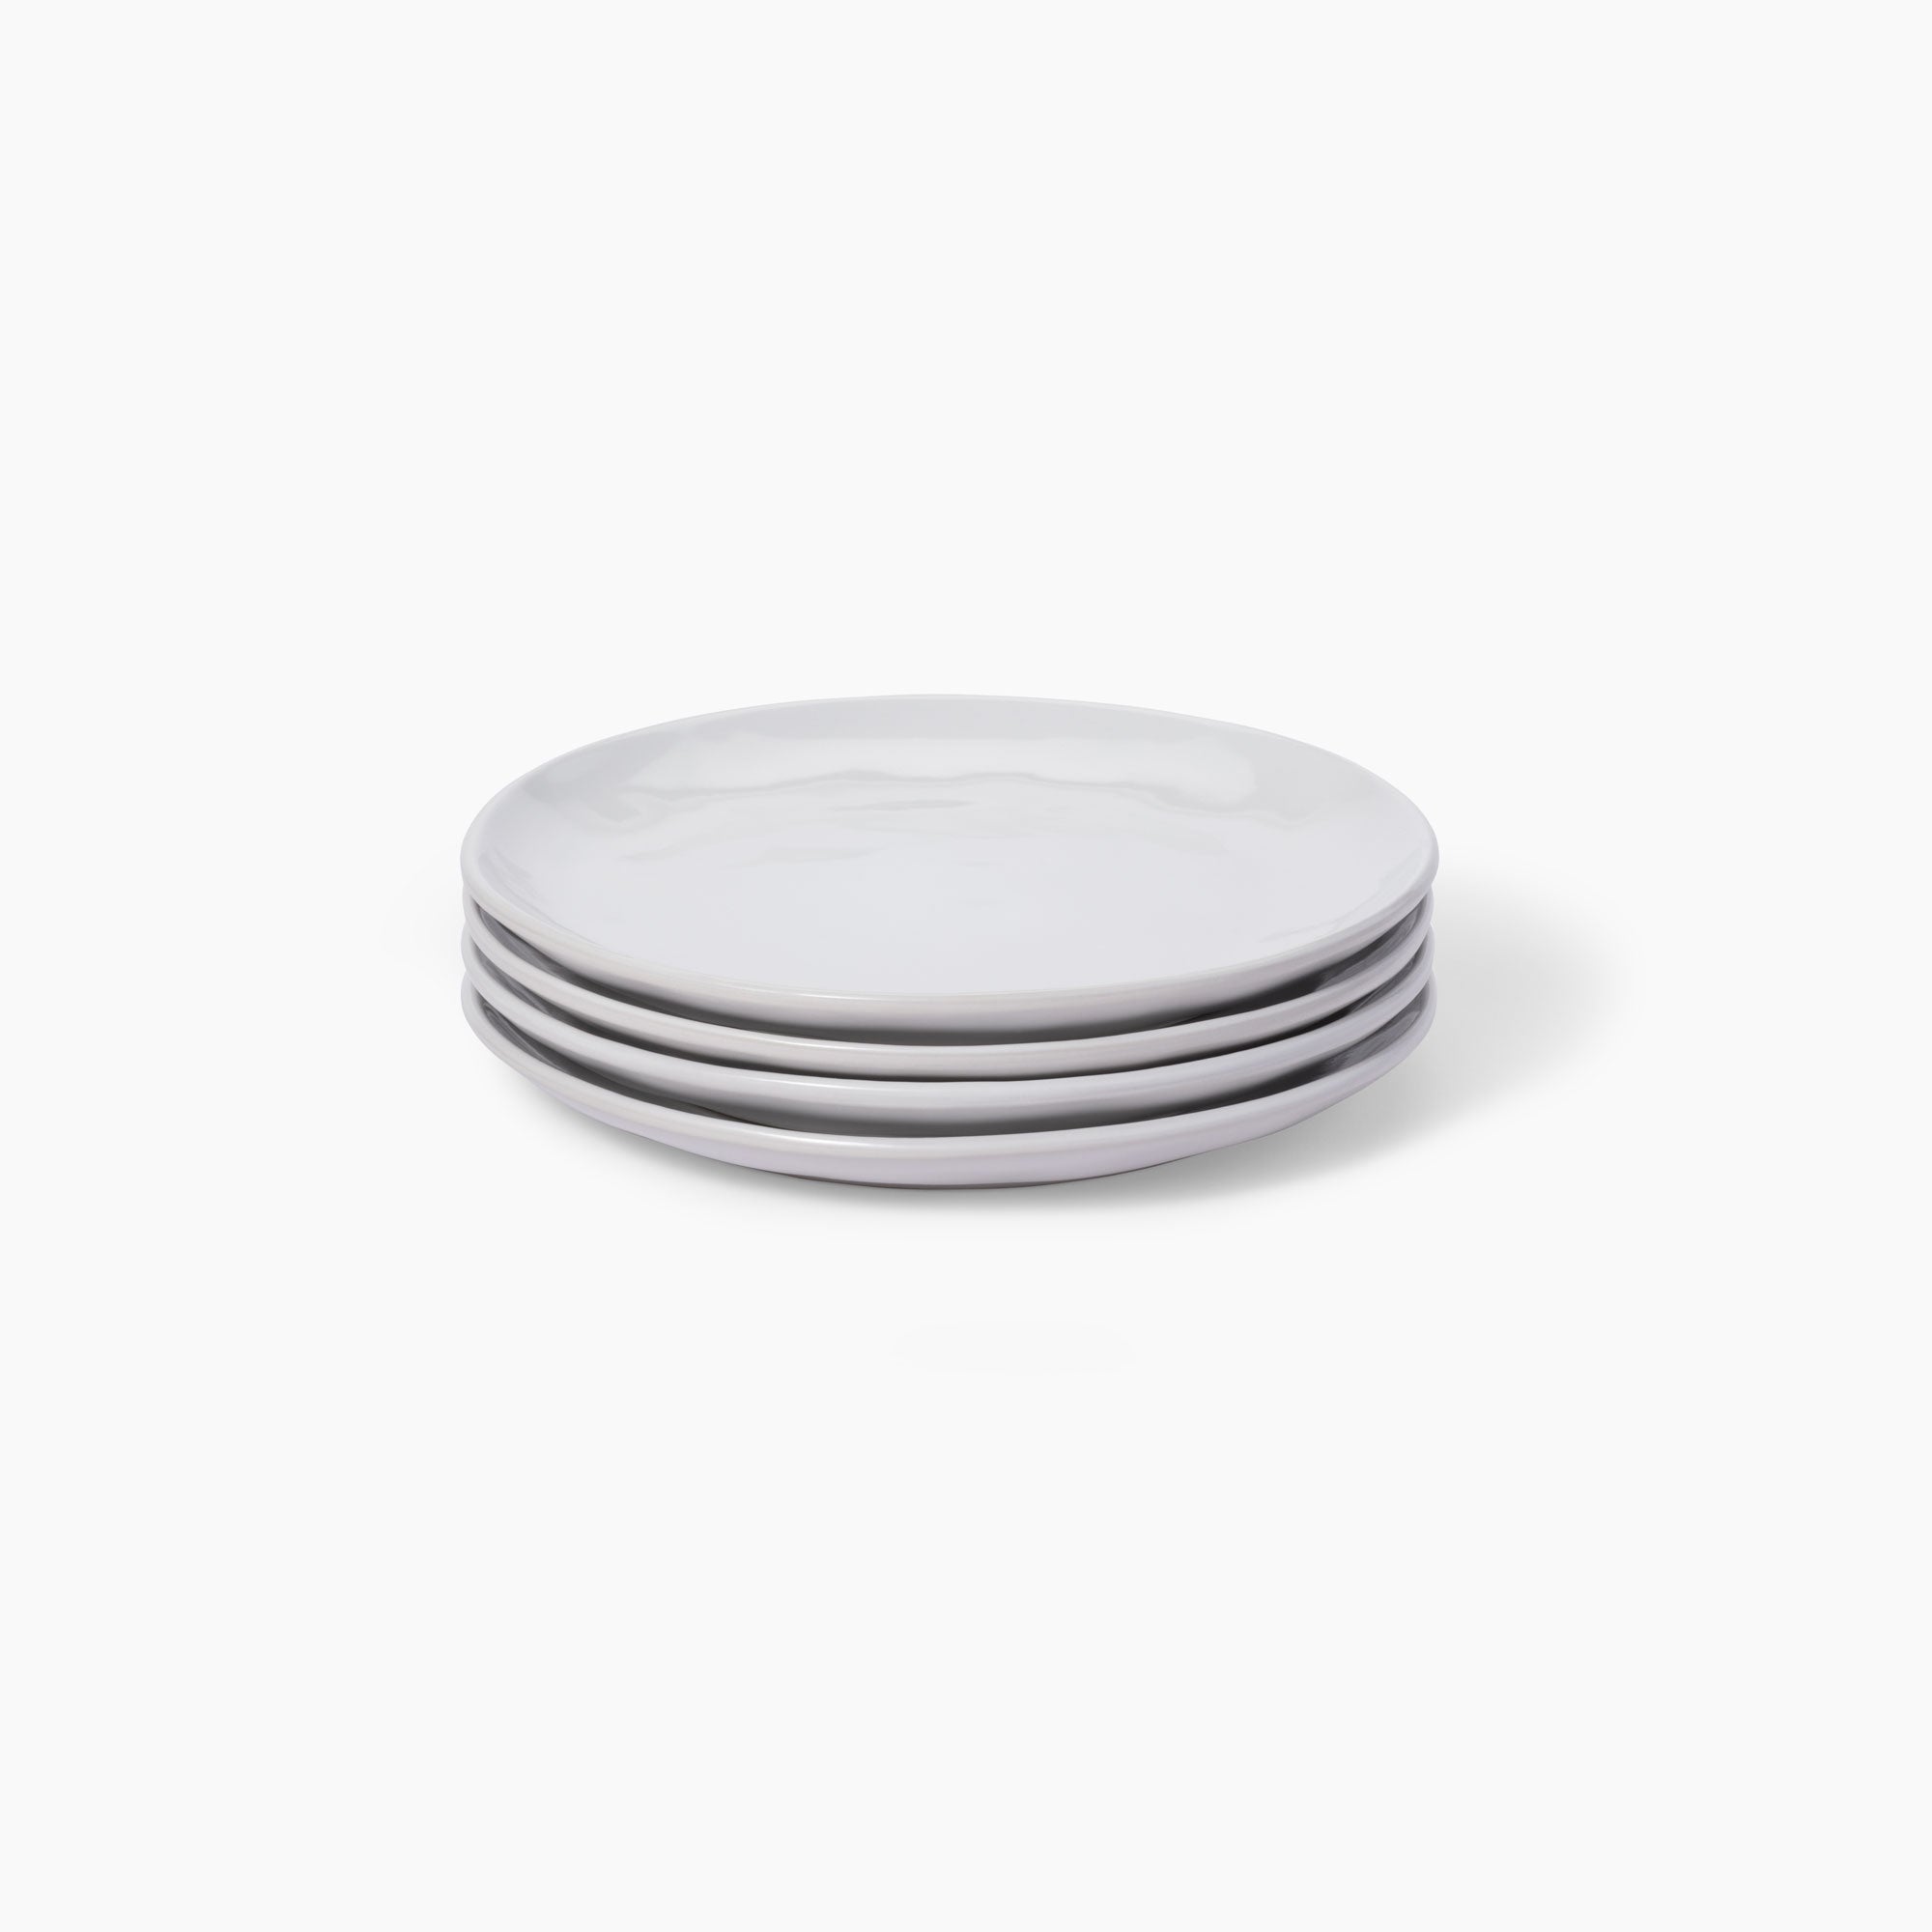 solids 01-02-01 filter_images_solids-white